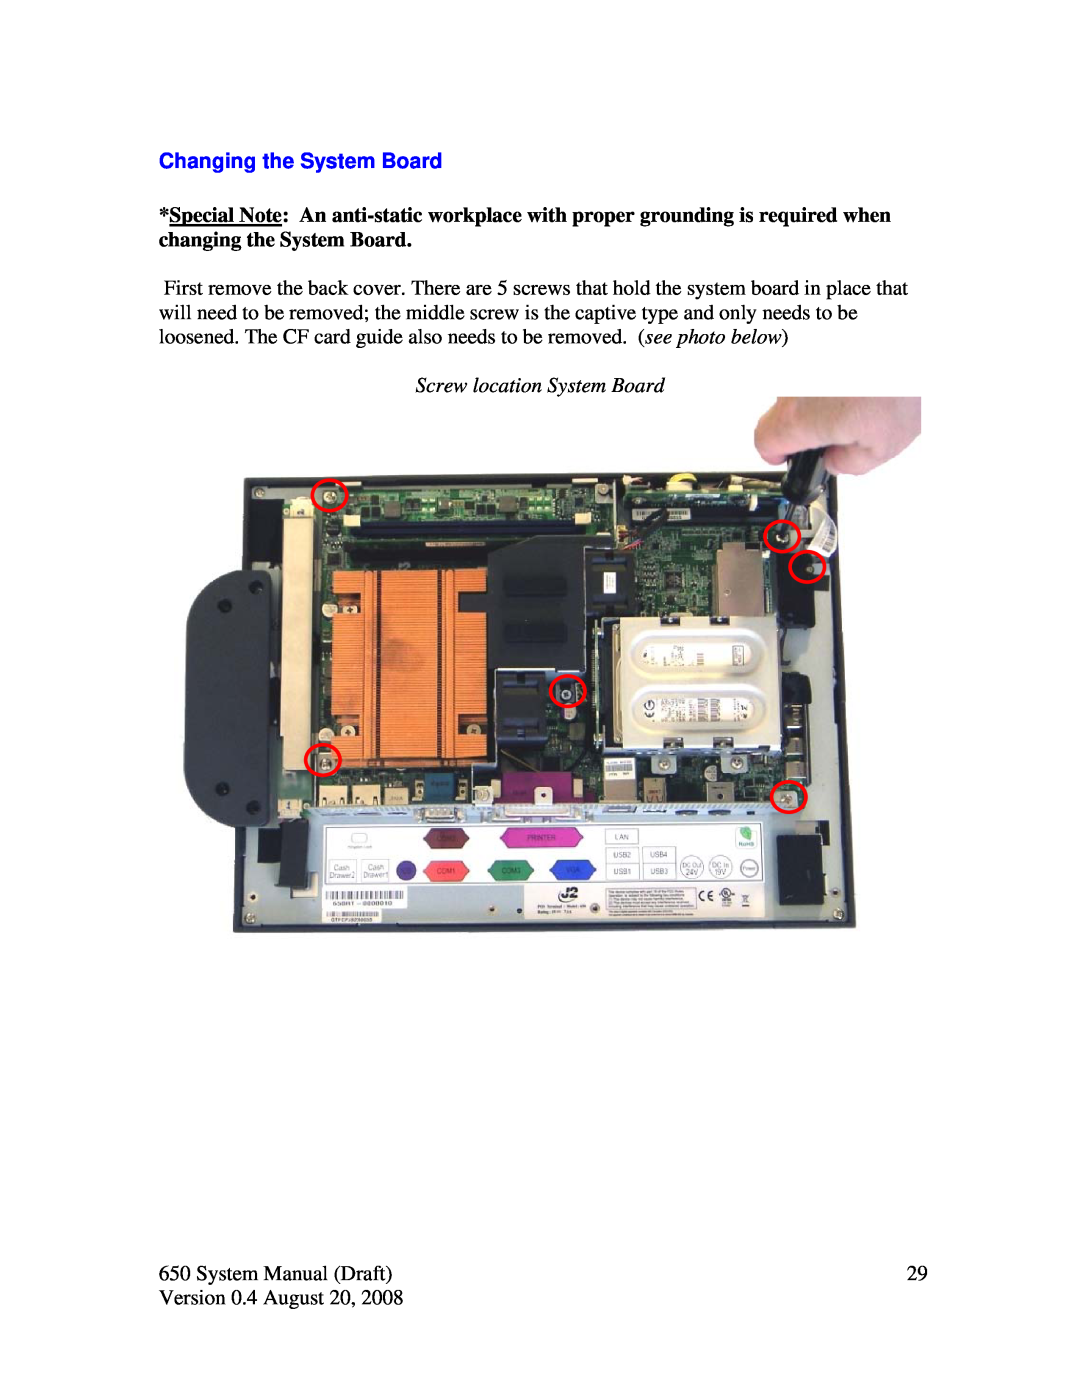 Intel J2 650 system manual Changing the System Board, Screw location System Board 